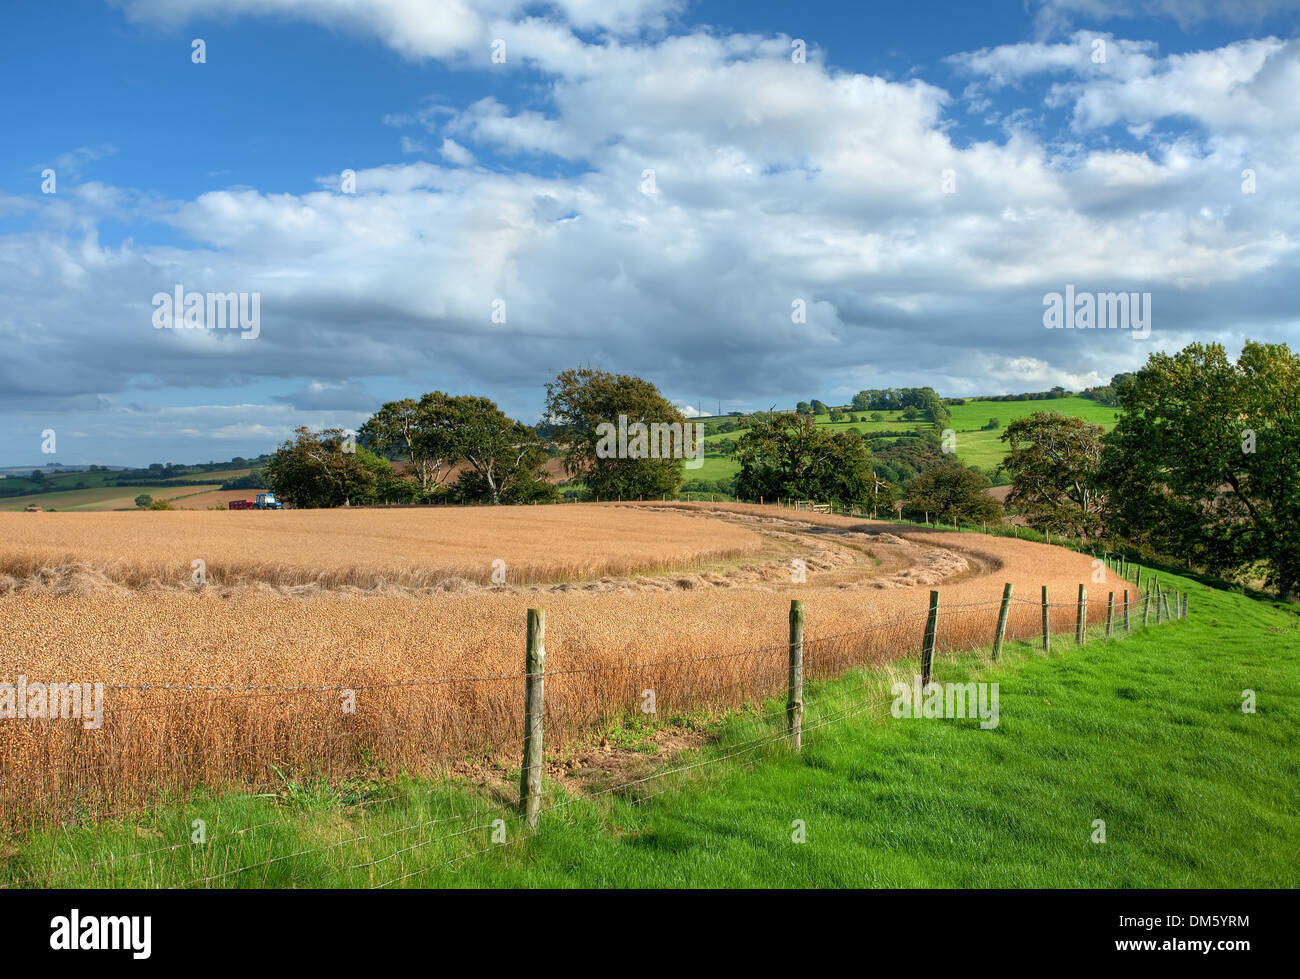 Harvesting the crops on Meon Hill near Chipping Campden, Gloucestershire, England. Stock Photo